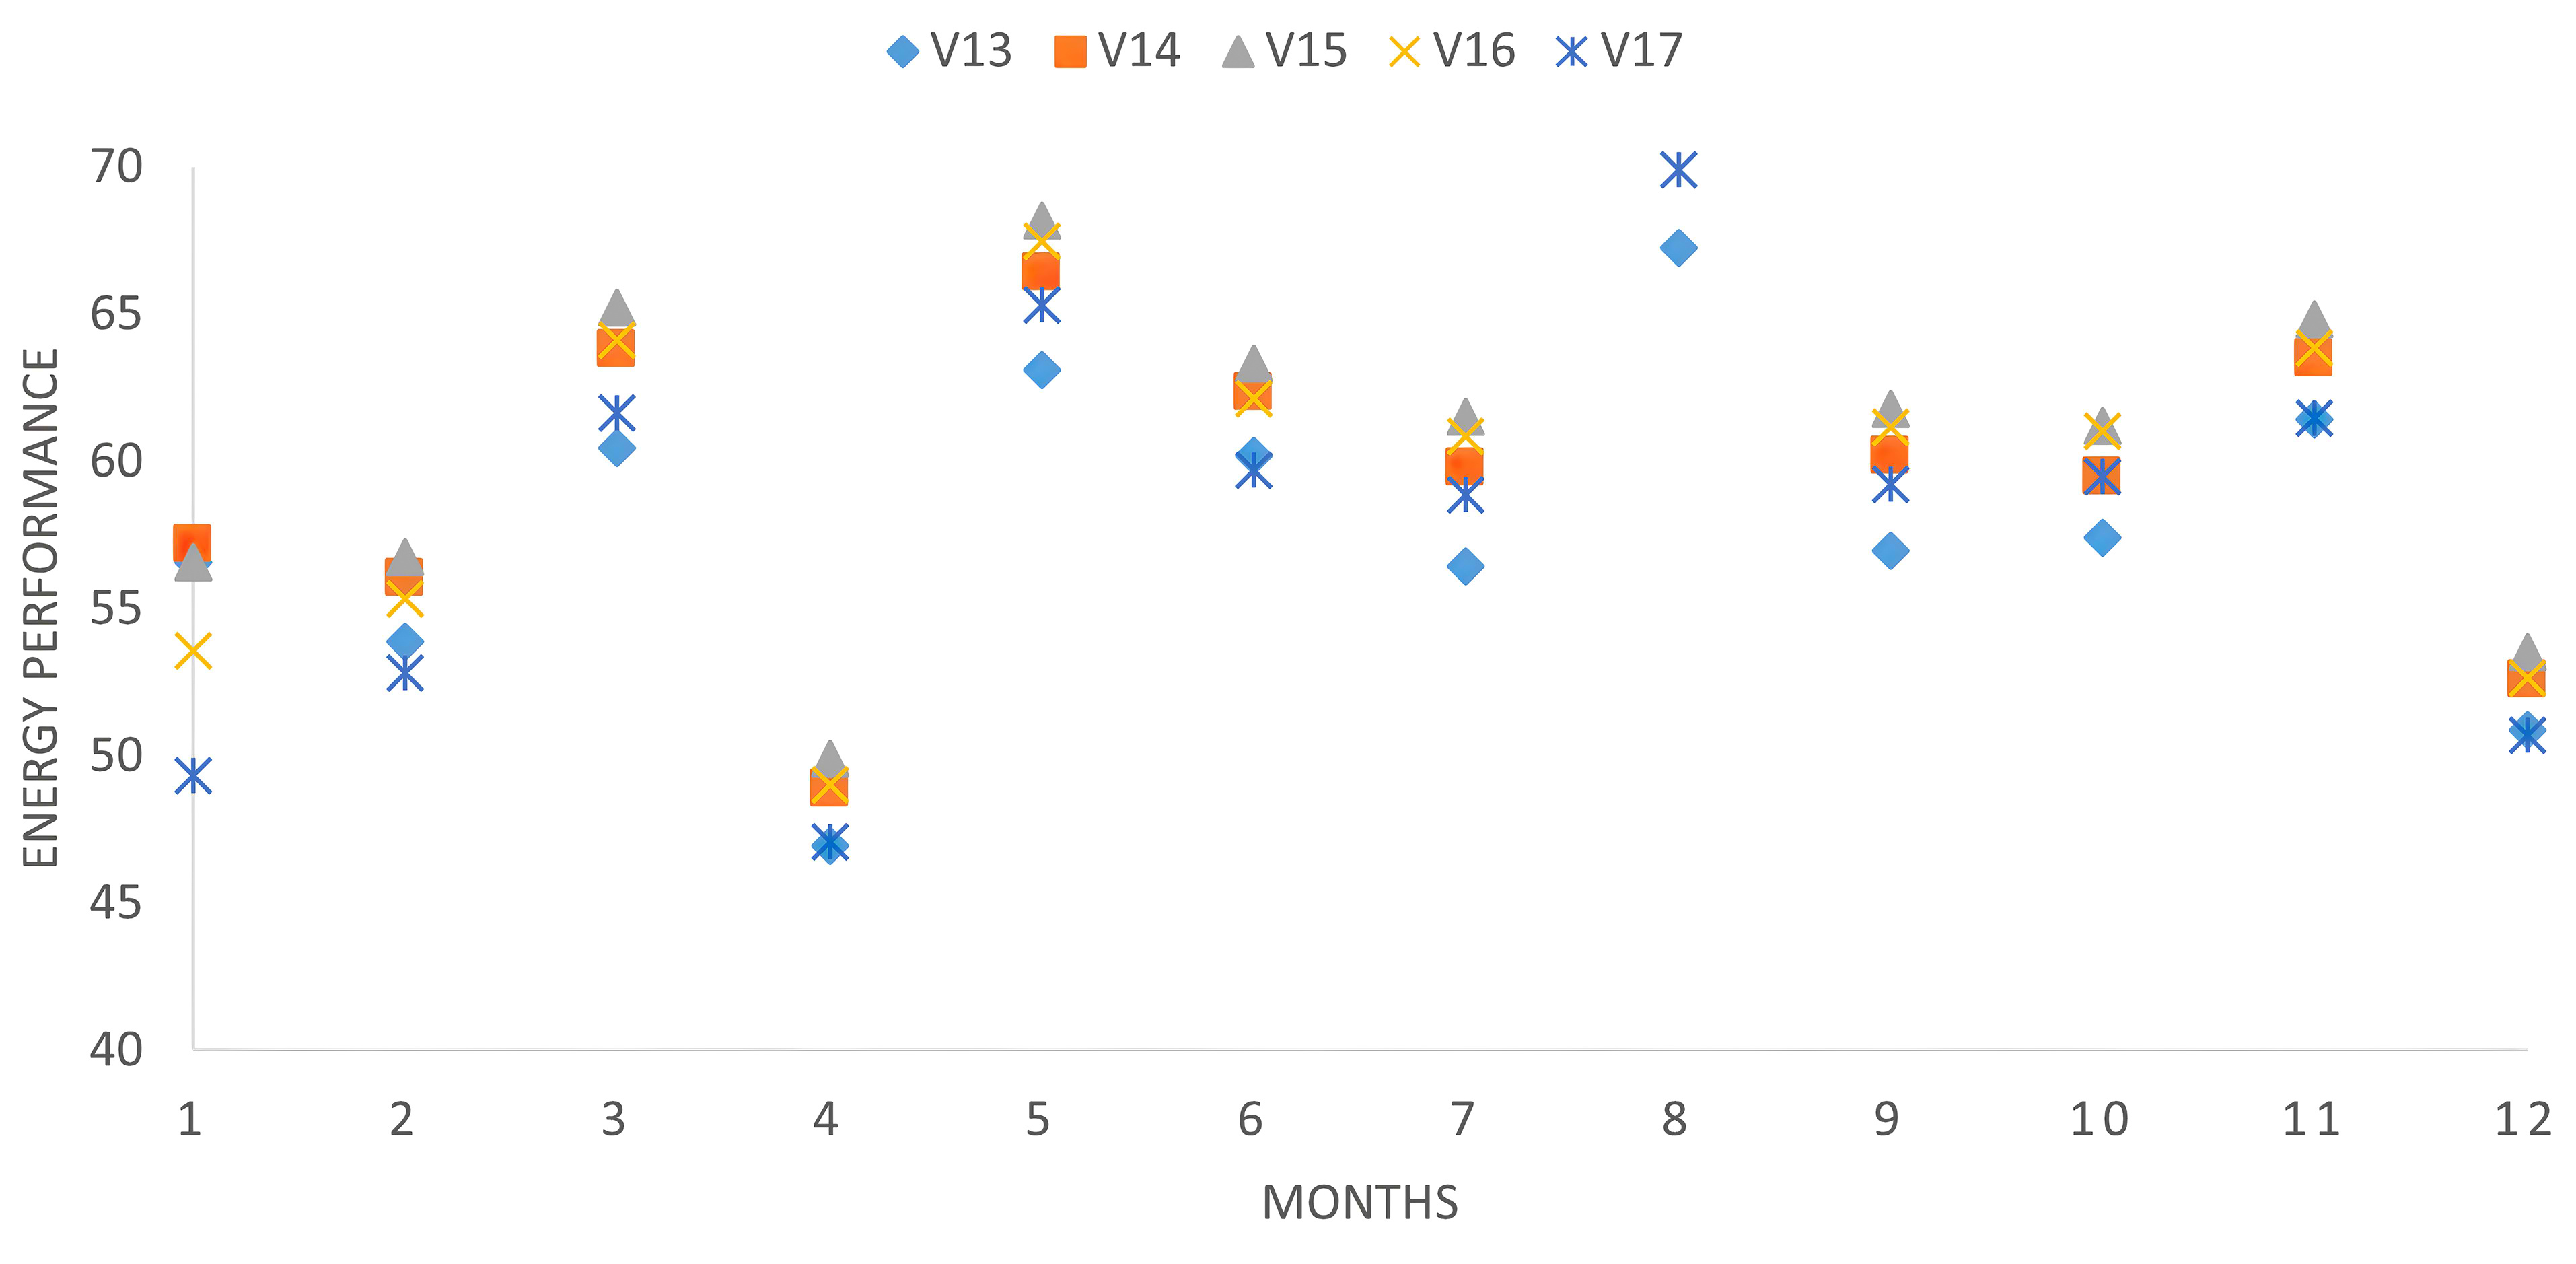 Comparison of simulated monthly energy cooling demand (kWh) for all wall thickness optimization variables (V13 to V17).